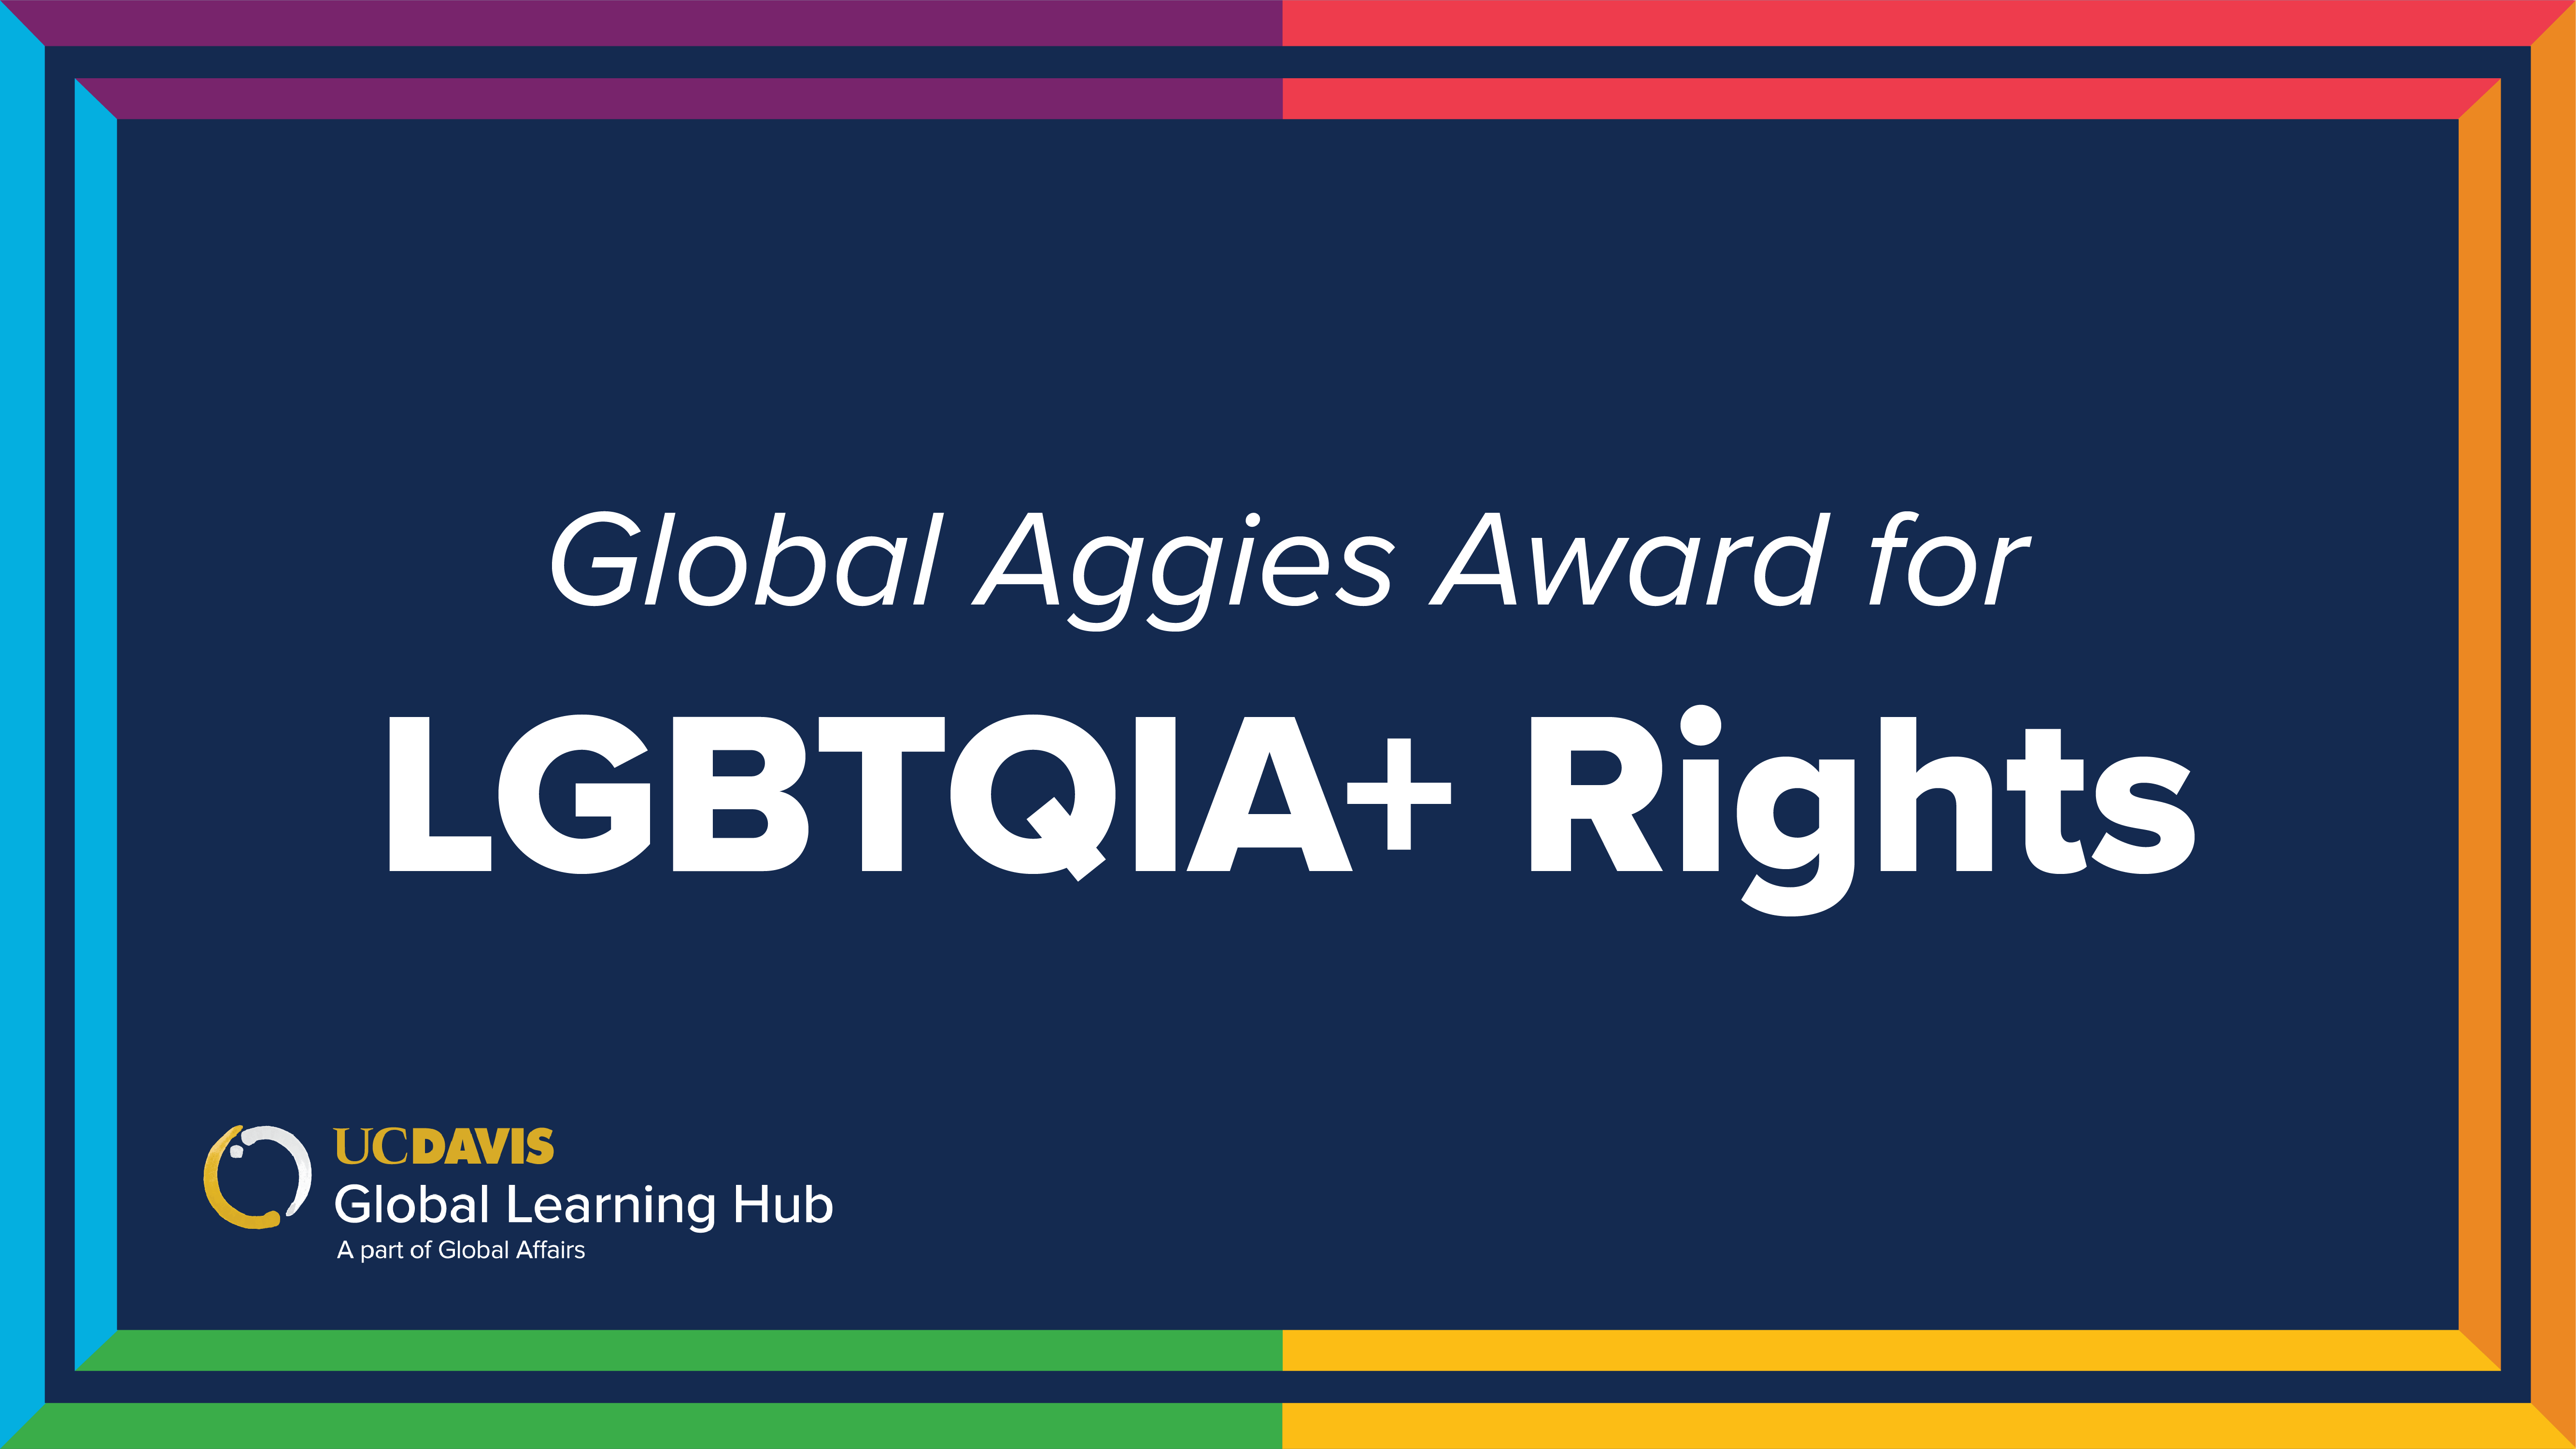 Graphic with text: "Global Aggies Award for LGBTGIA+ Rights